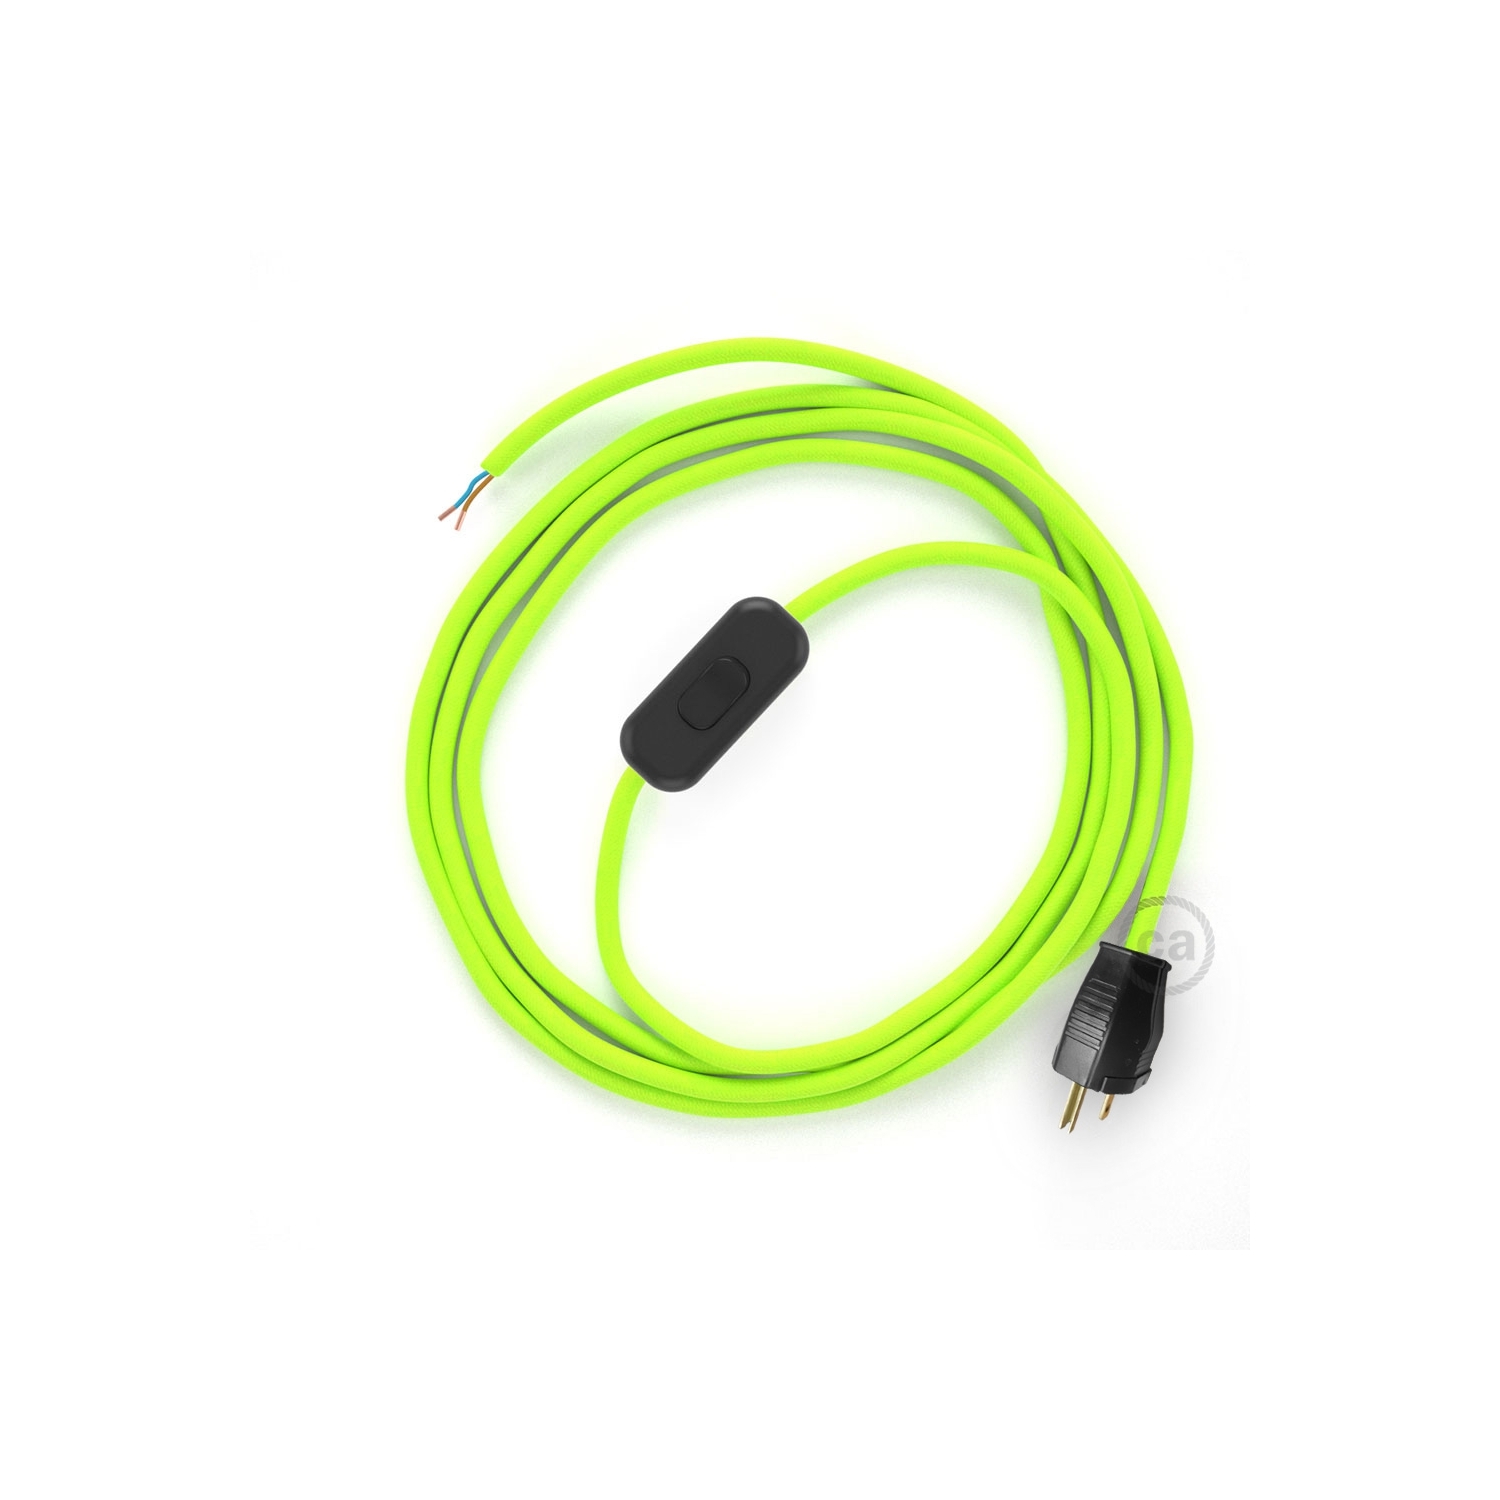 Power Cord with in-line switch, RF10 Neon Yellow - Choose color of switch/plug